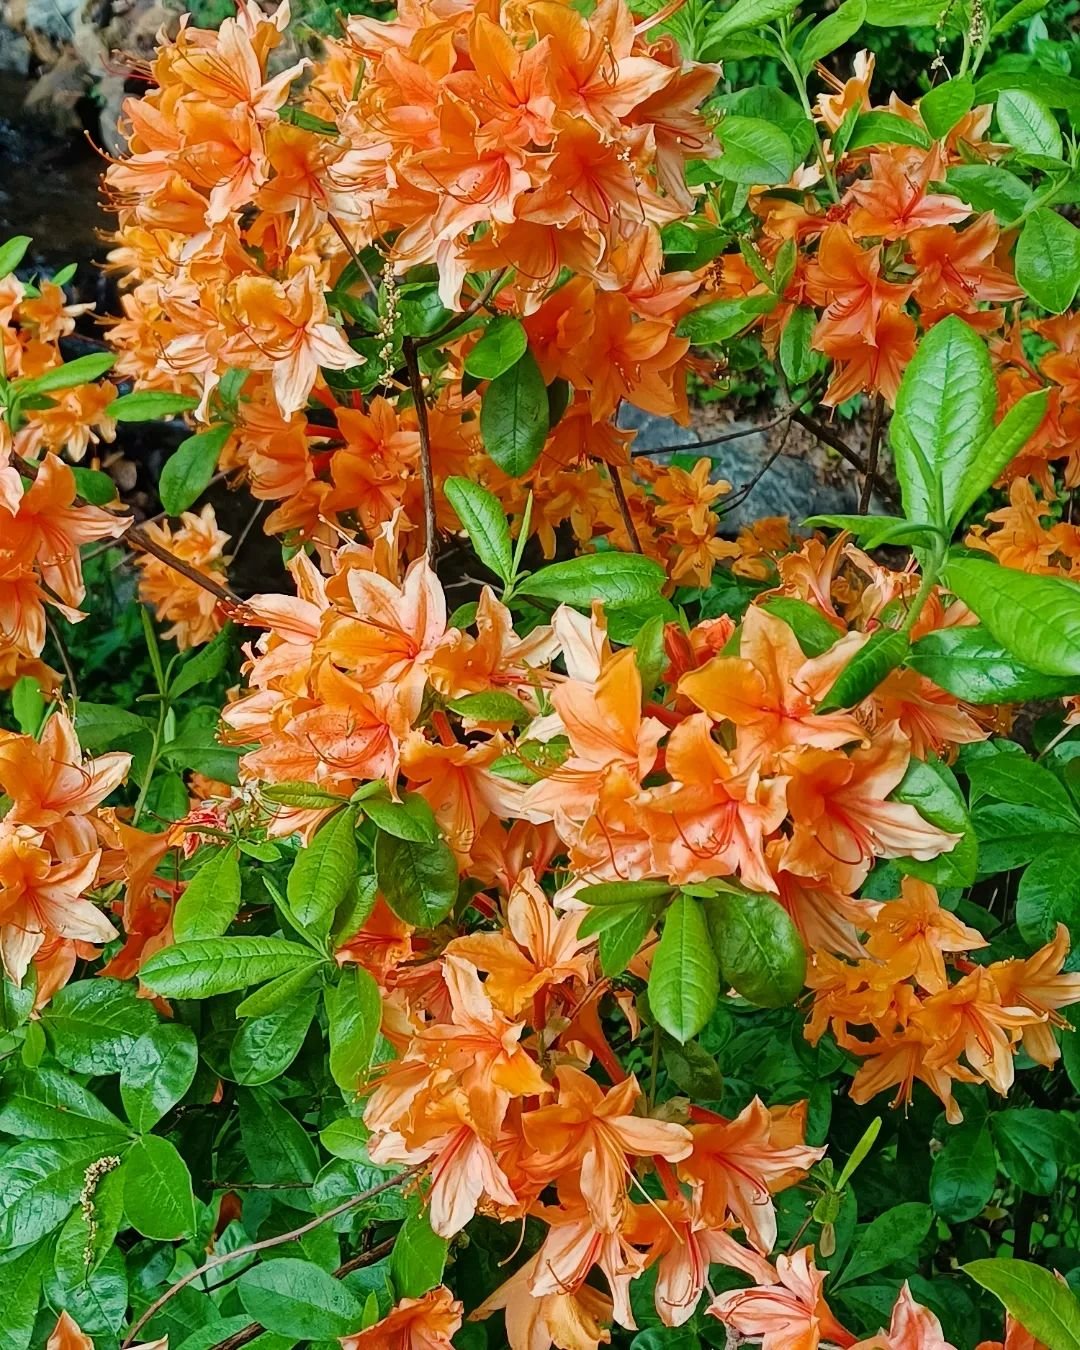 The stunning Flame Azalea is in full bloom now in the mountains of Western North Carolina.

This beauty really stands out in the spring landscape. I have two on the banks of my creek.

Botanist William Bartram observed Flame Azaleas in North Georgia 